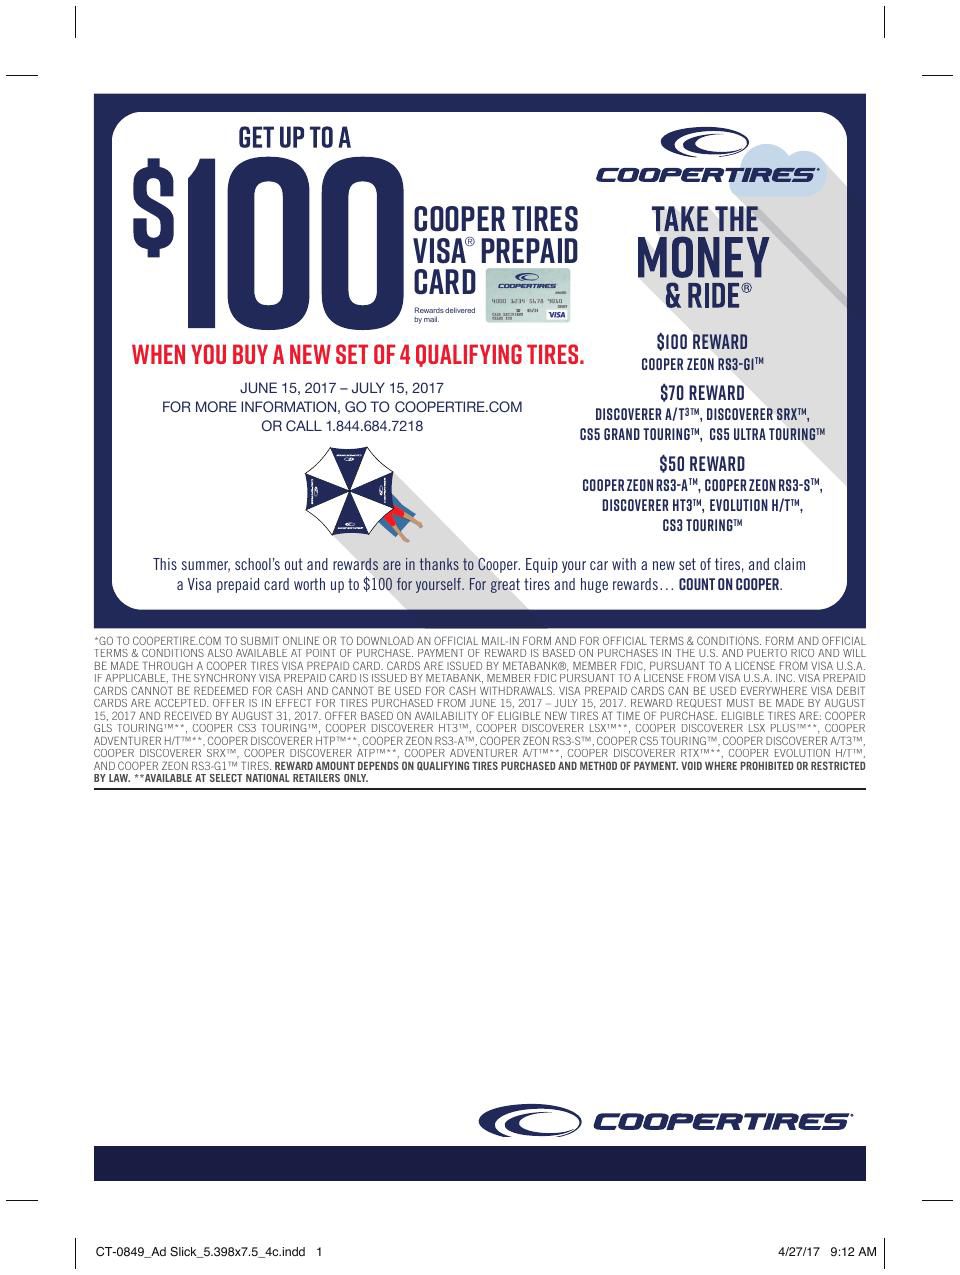 cooper-tire-dealers-to-promote-summer-rebate-tires-advertise-with